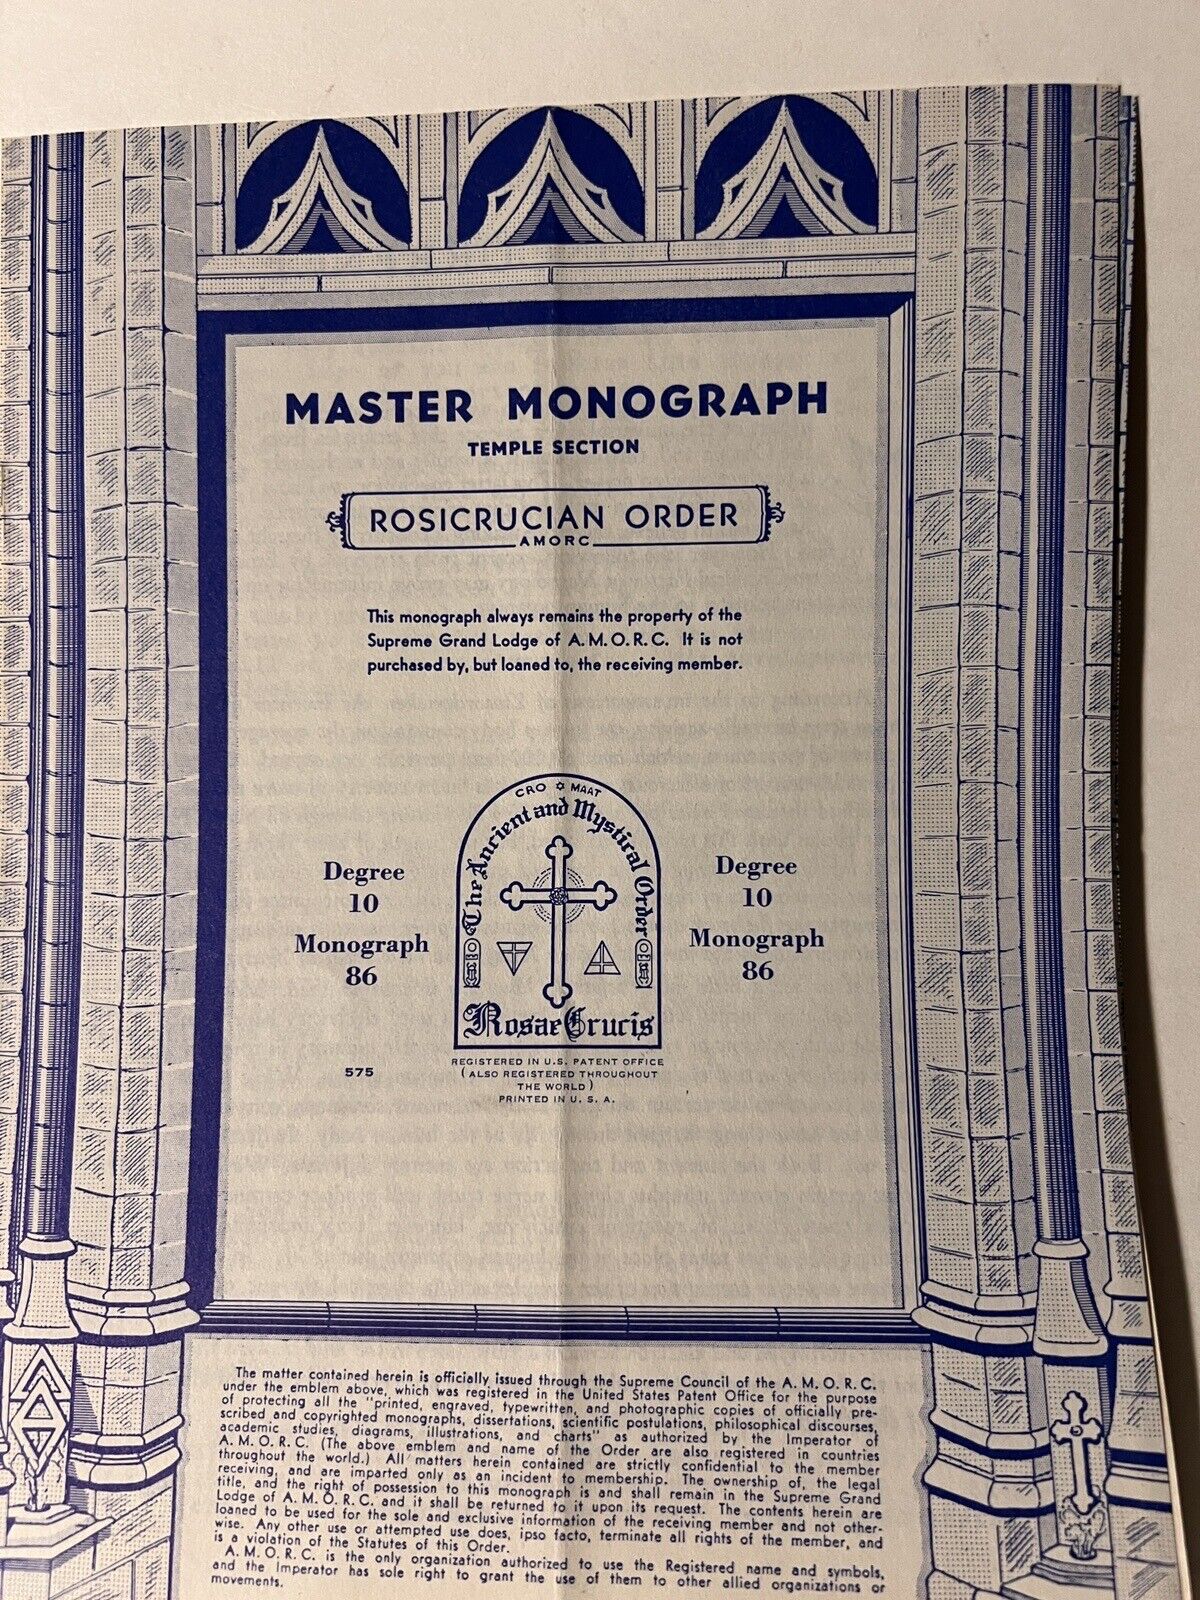 Vintage Rosicrucian Master Monograph 10th Degree Temple Section AMORC